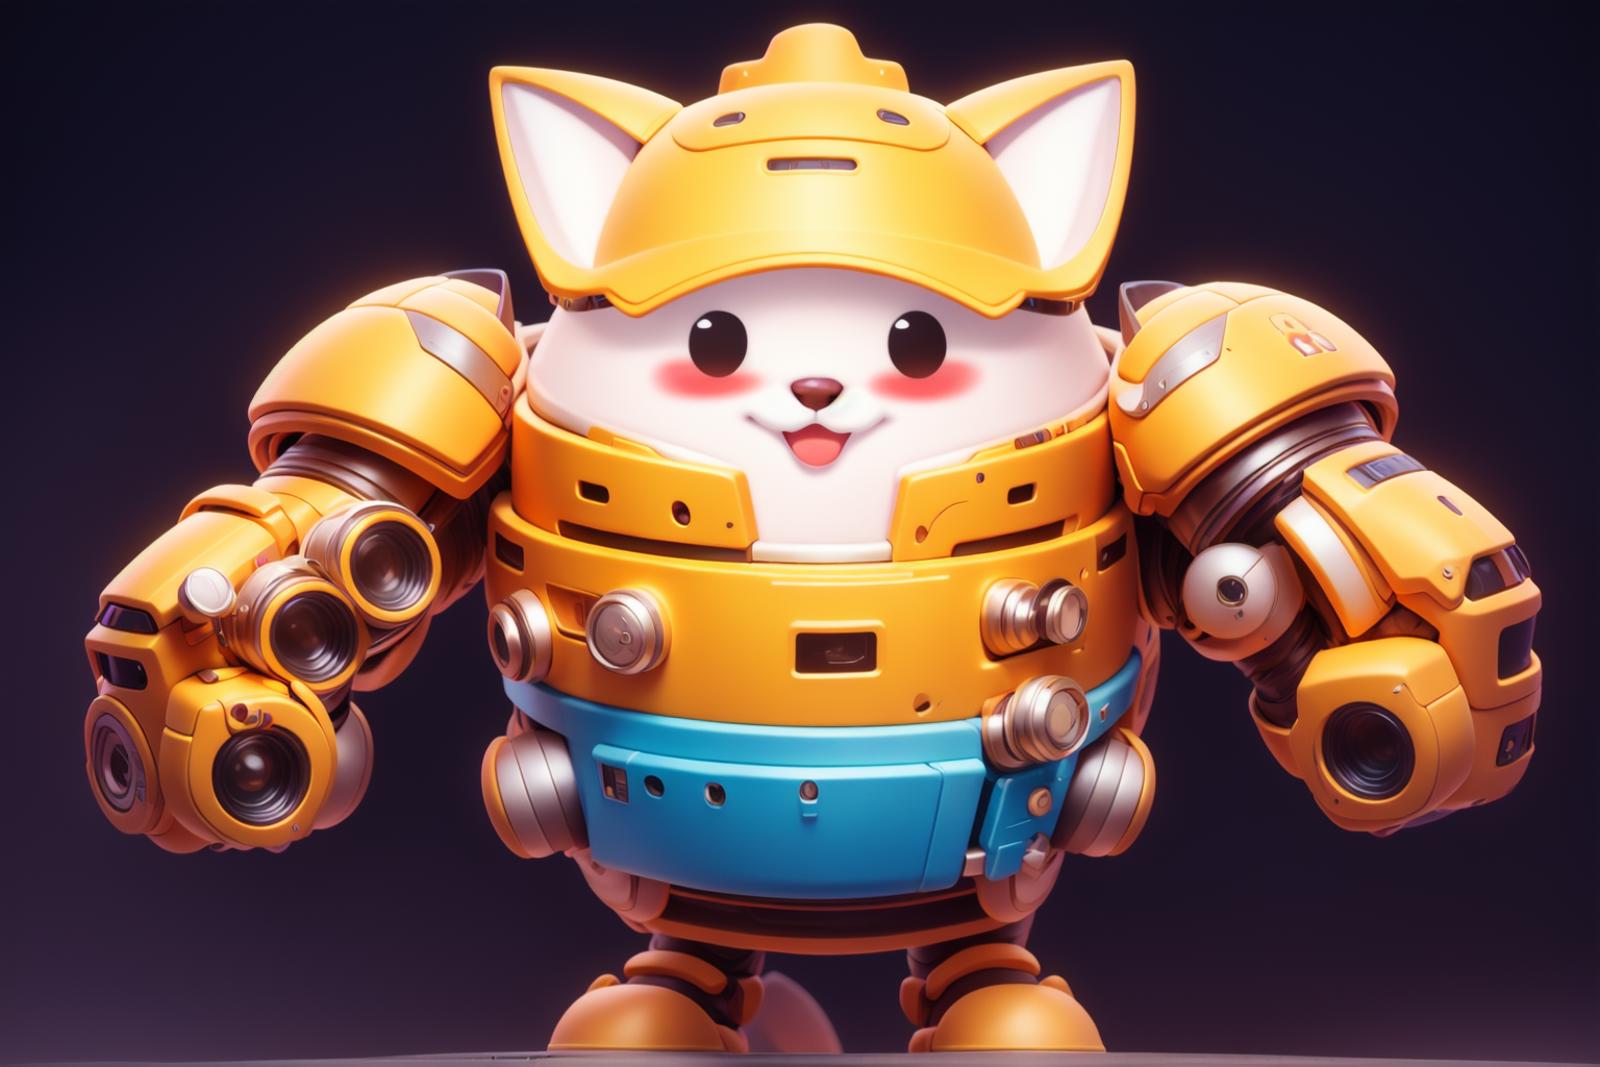 AI model image by cliffcat